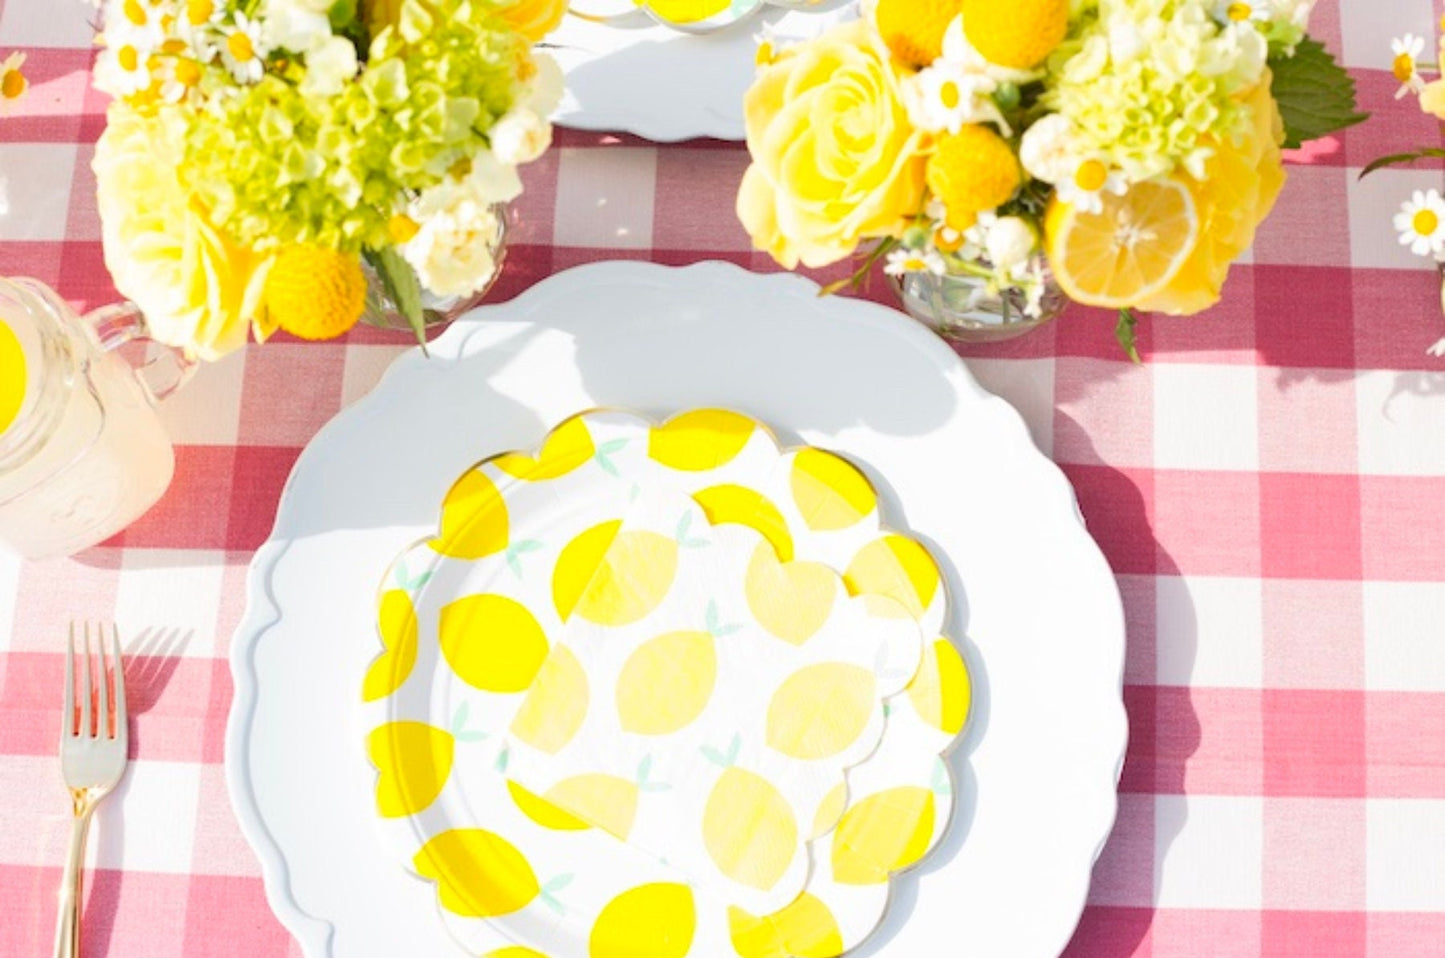 Lemon Themed Party Paper Plate Cups Napkins Cutlery Set